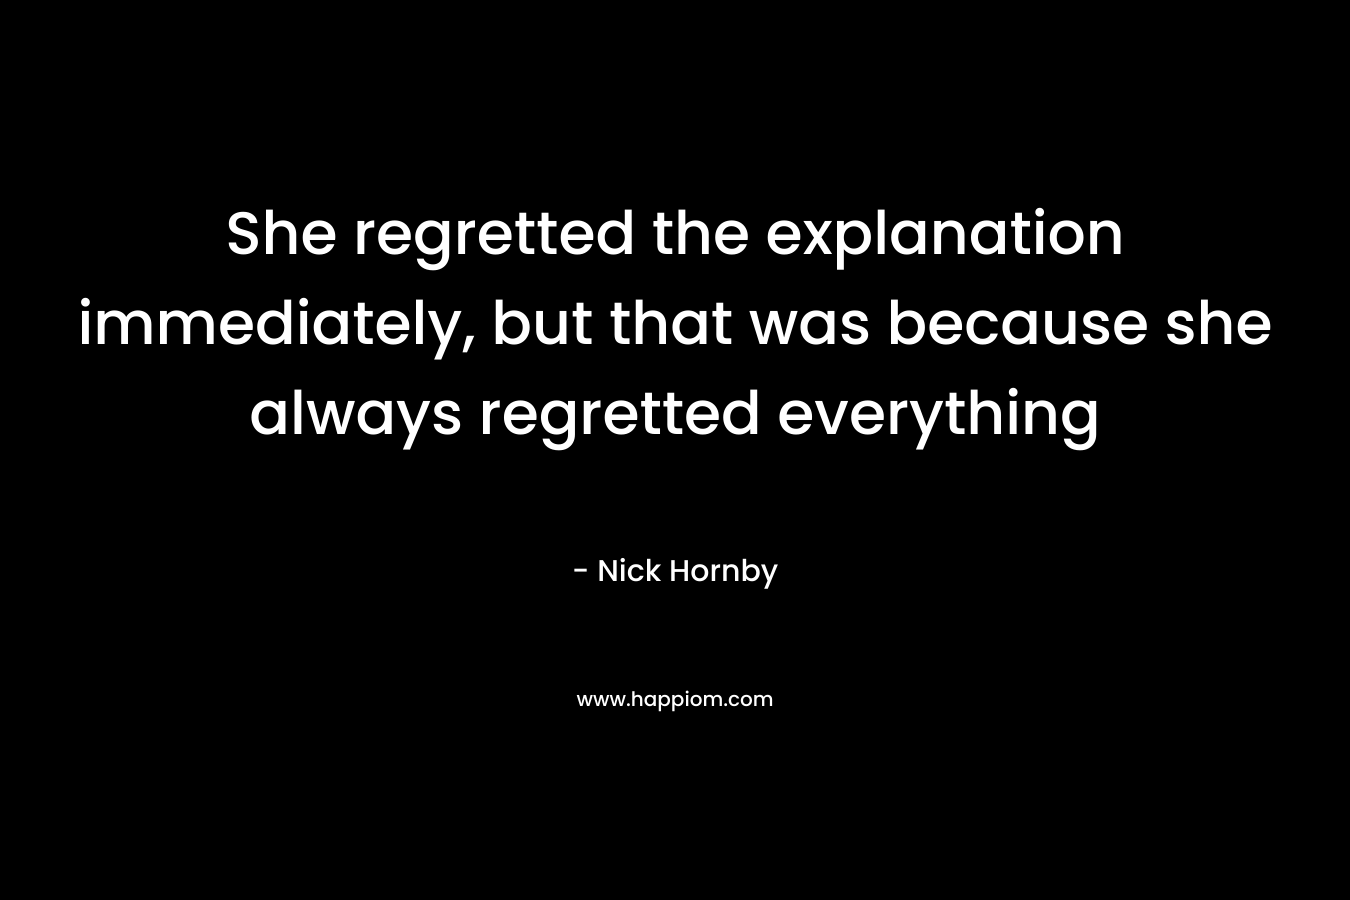 She regretted the explanation immediately, but that was because she always regretted everything – Nick Hornby